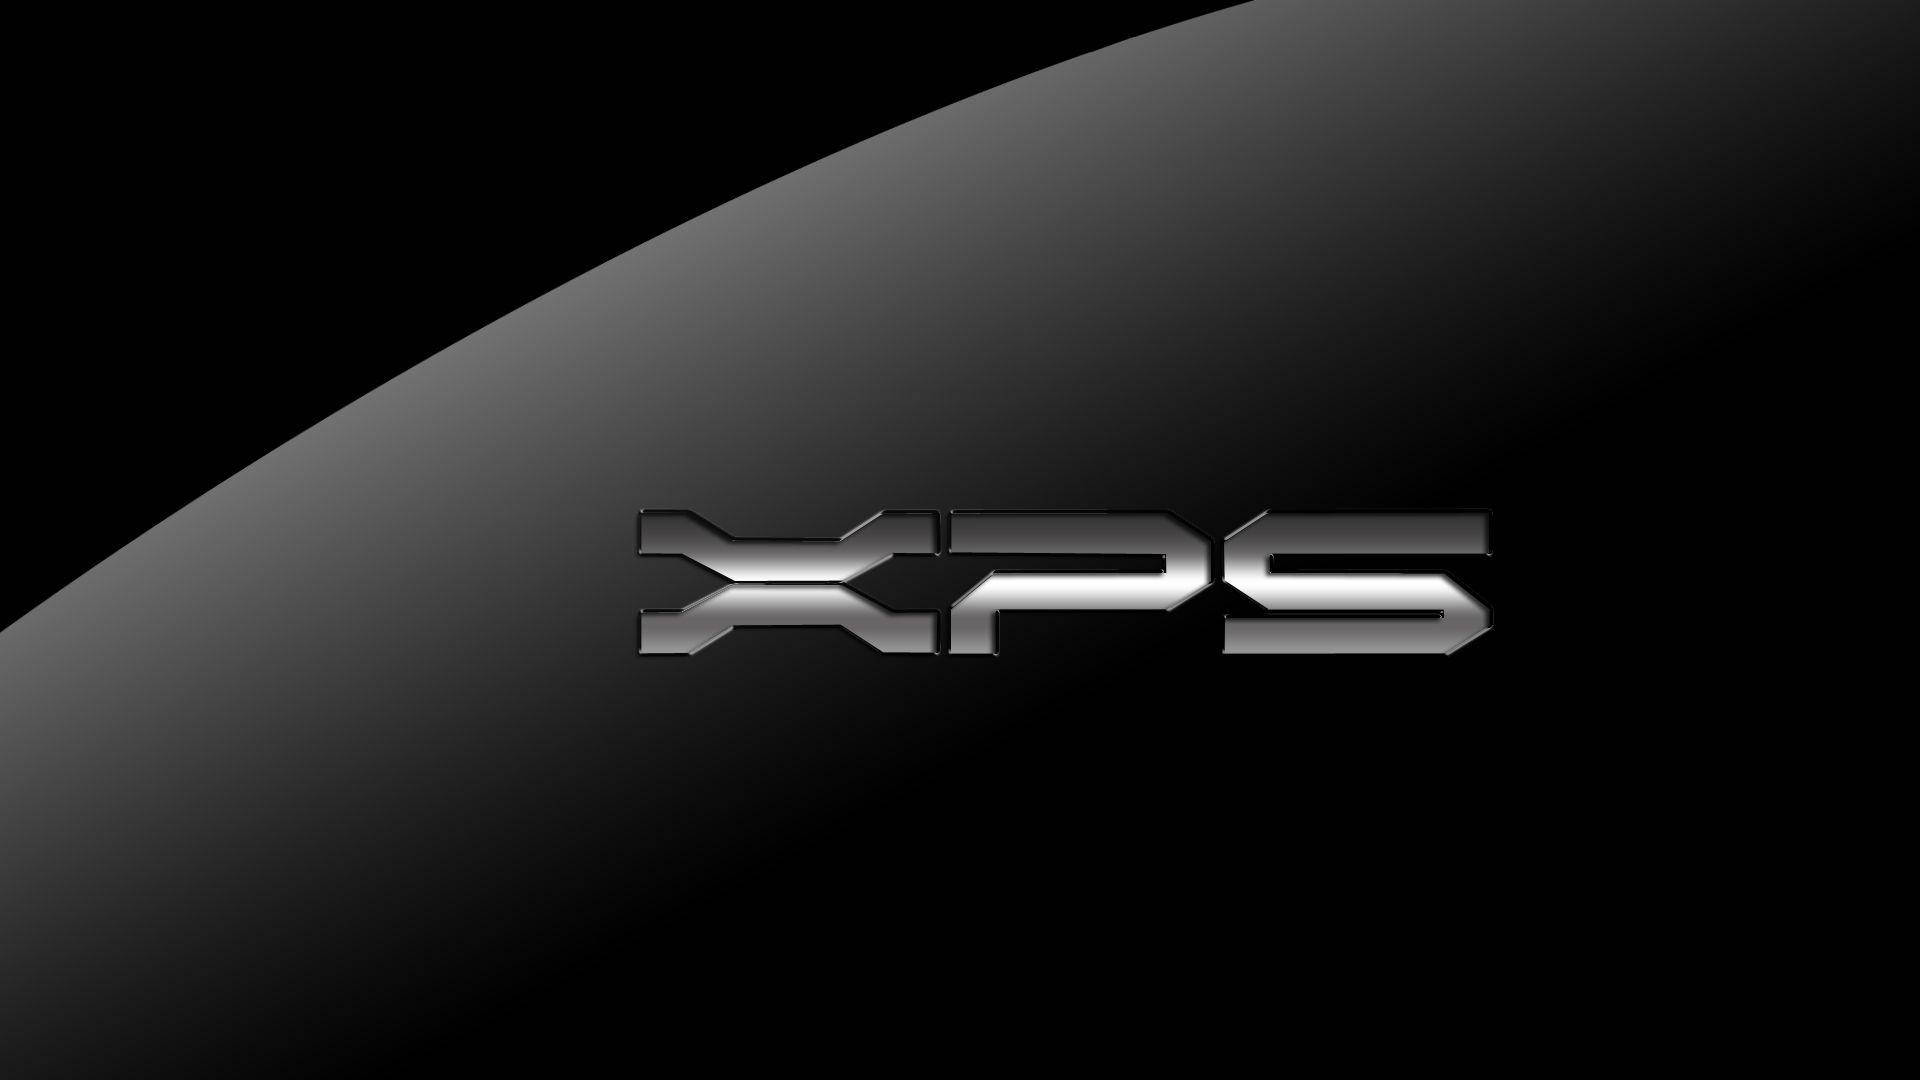 Xps Dell Hd In Black Background